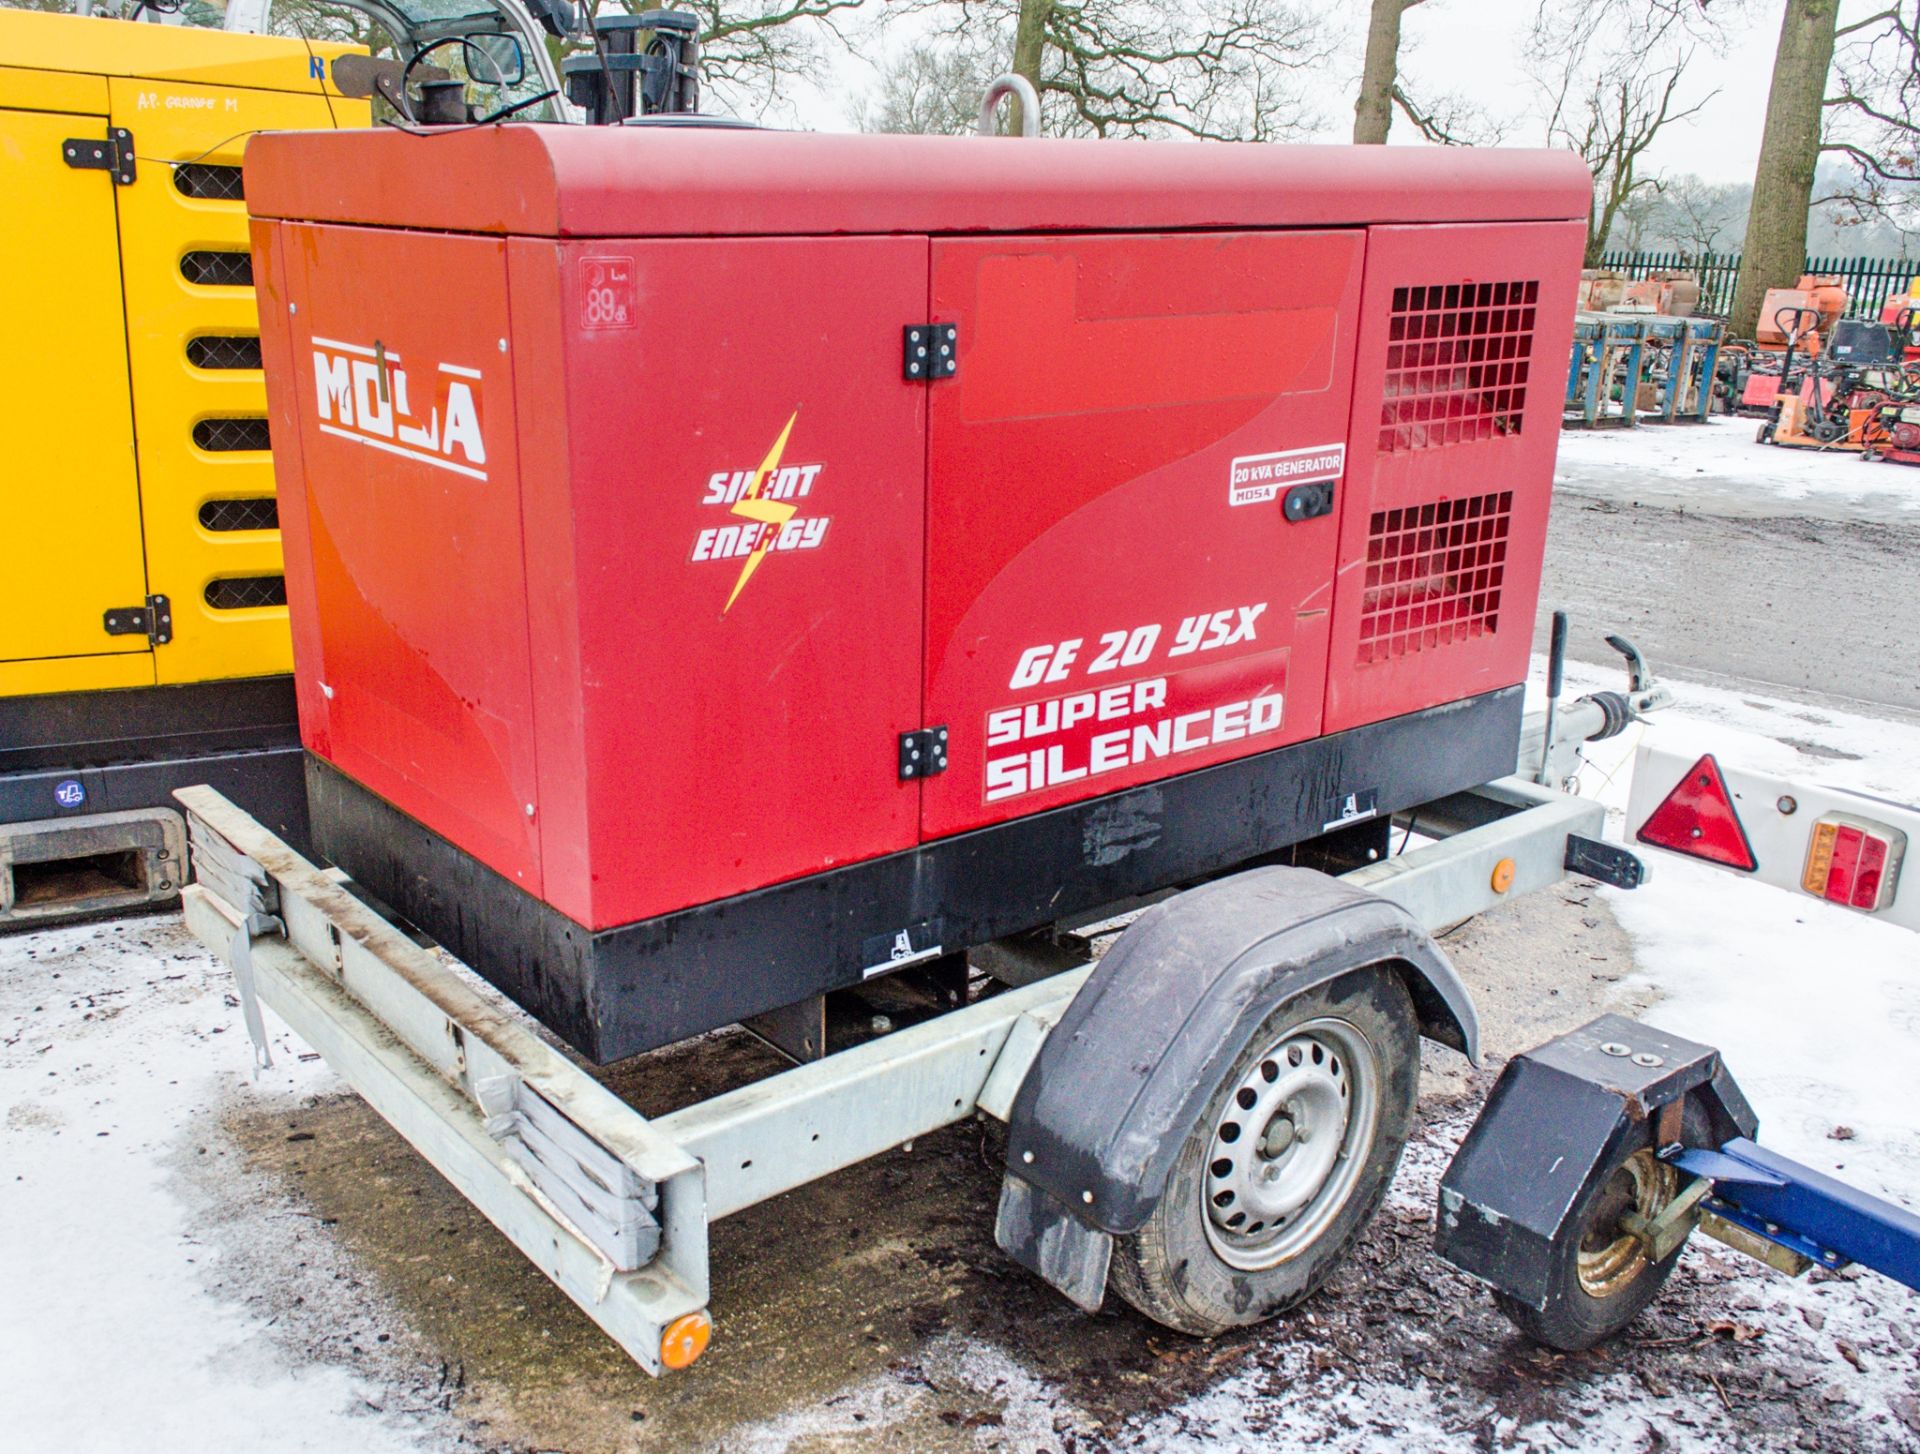 Mosa GE20 YSX 20 kva fast tow diesel driven generator Year: 2015 S/N: 37603 Recorded Hours: 6277 - Image 2 of 5